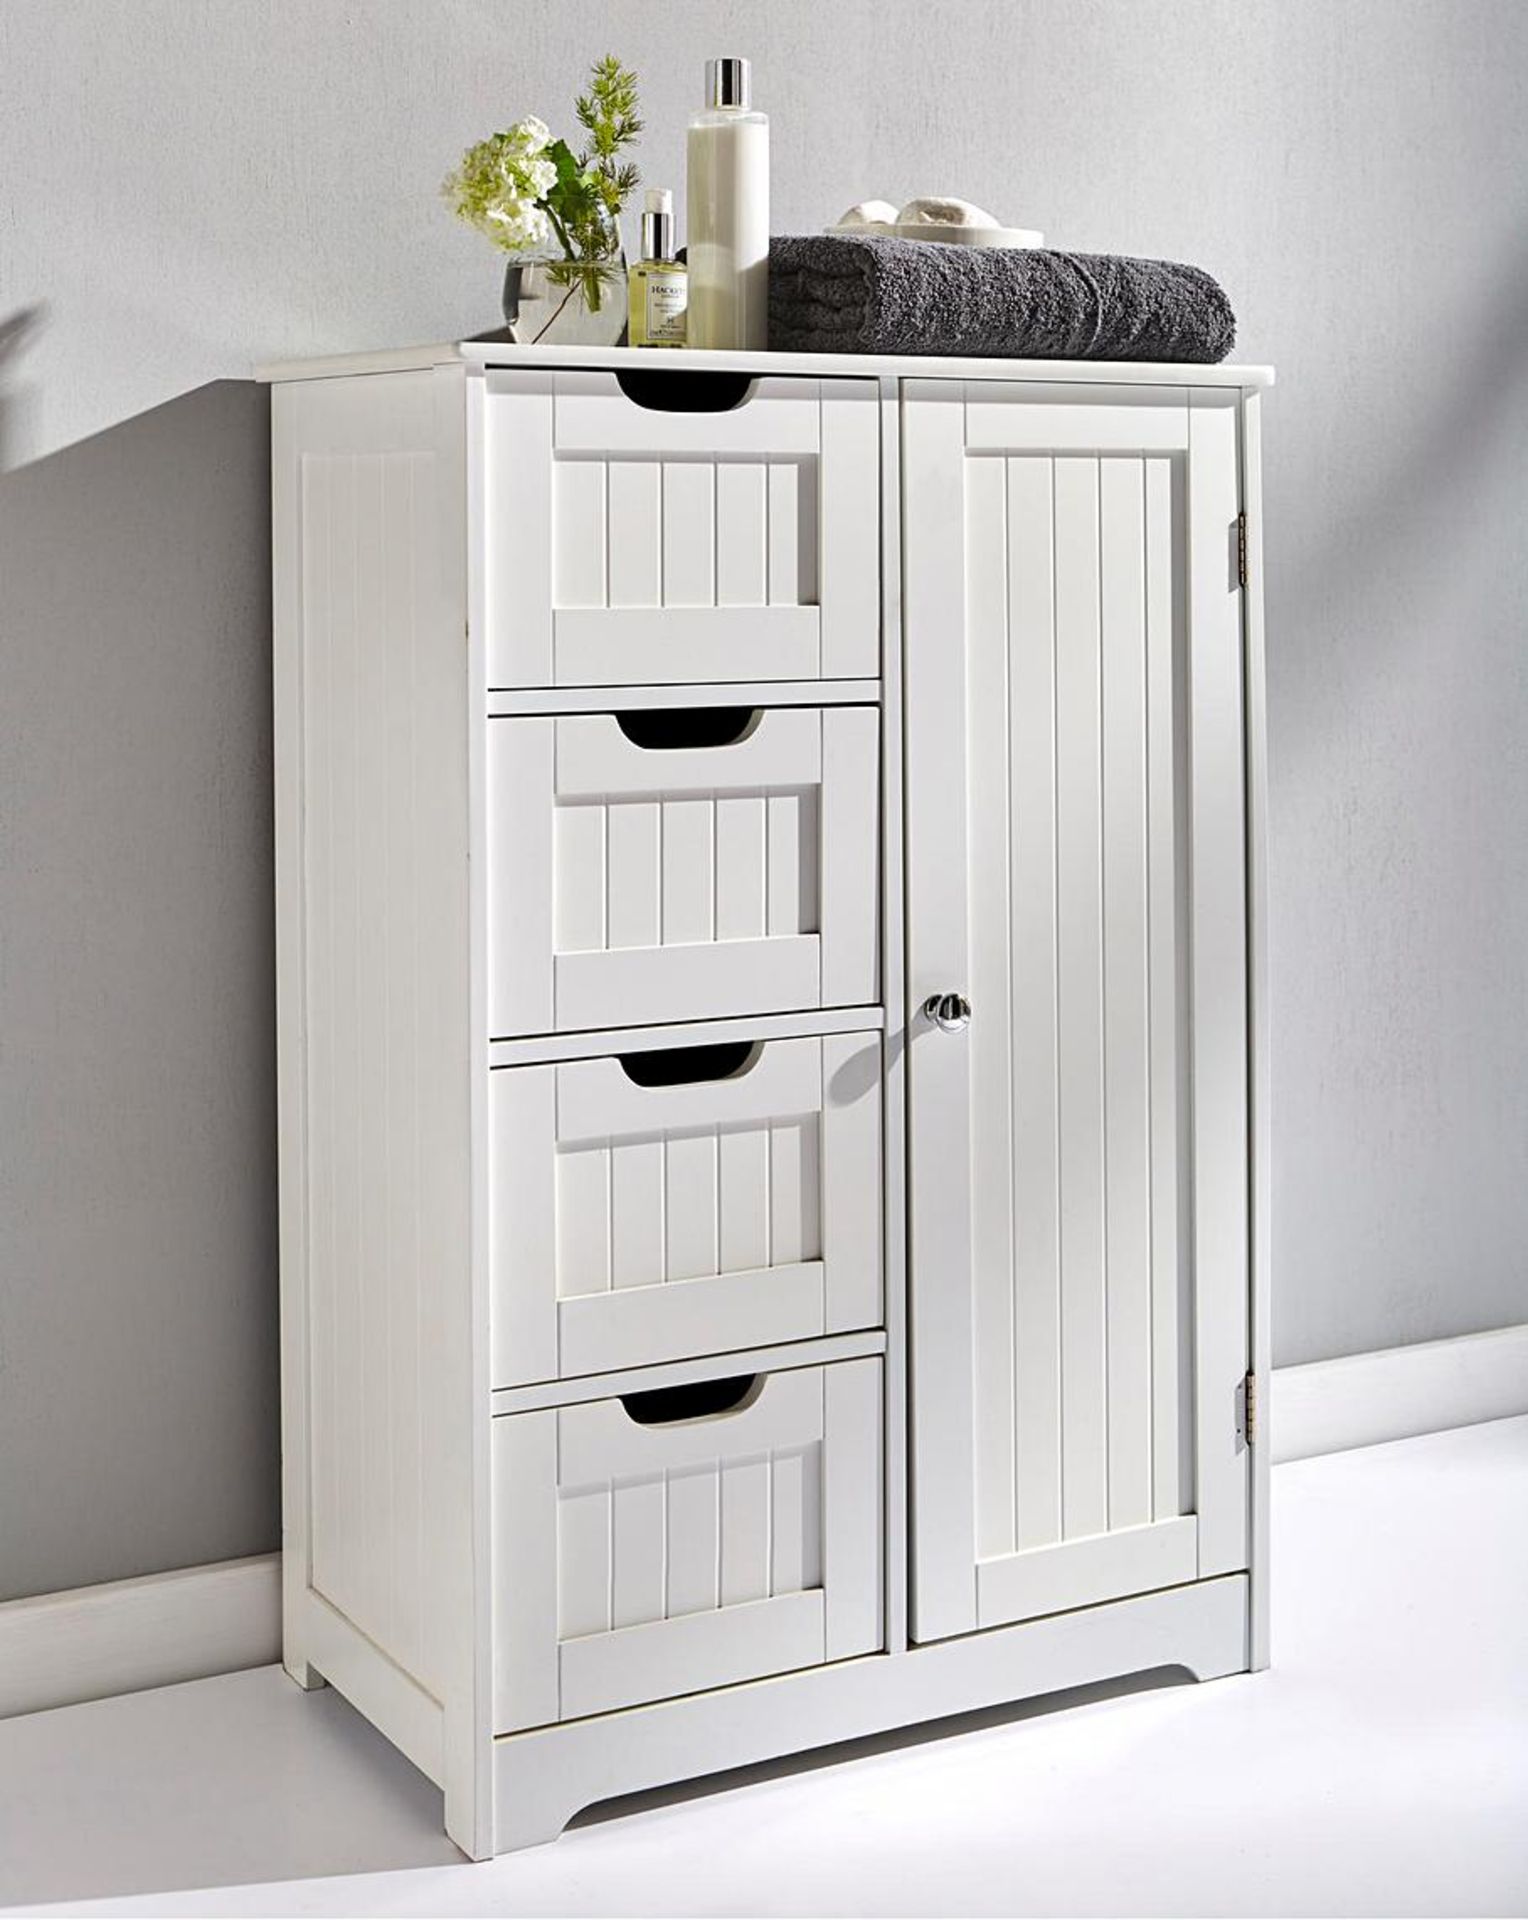 New England Storage Cabinet. - SR4. Great value, easy to assemble shaker-style bathroom furniture.